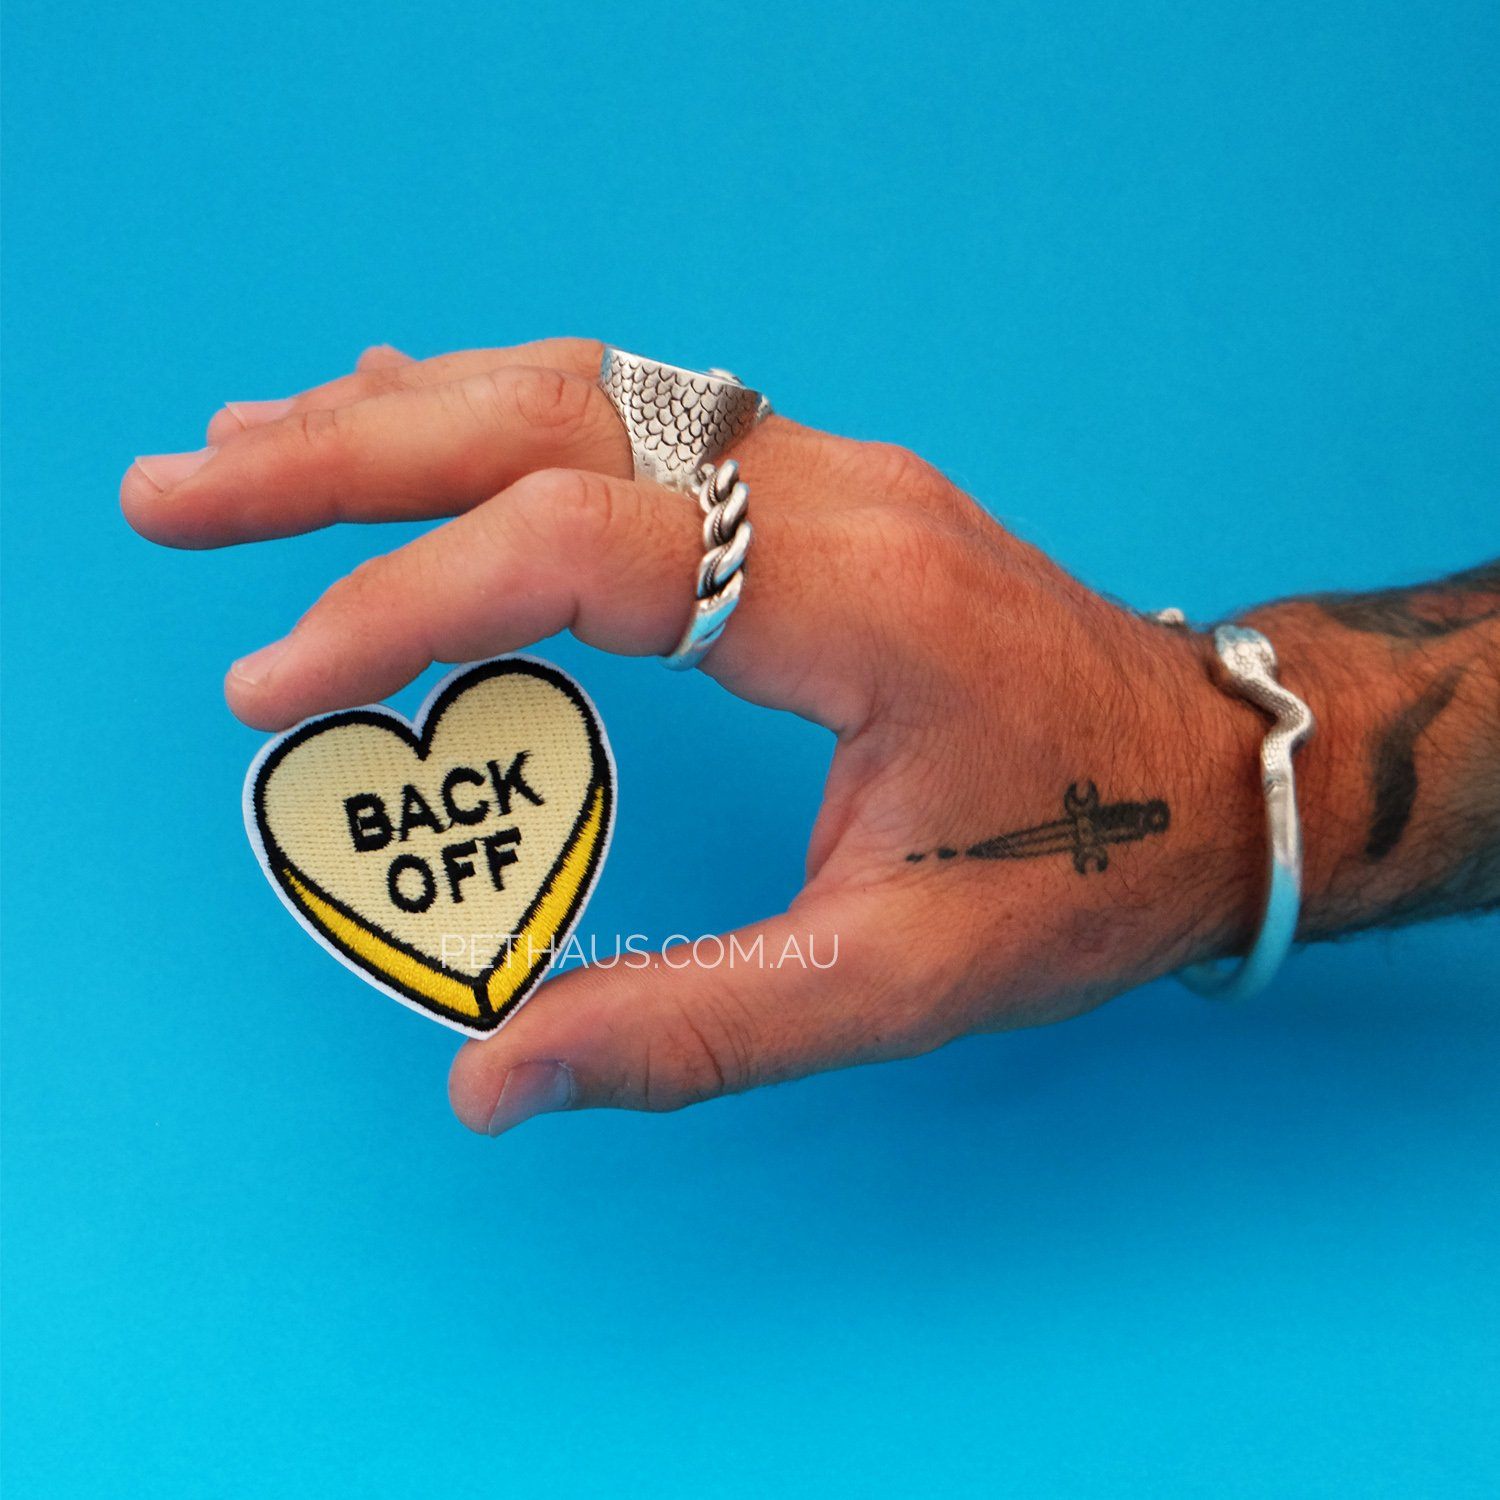 Back off heart patch, yellow heart patch